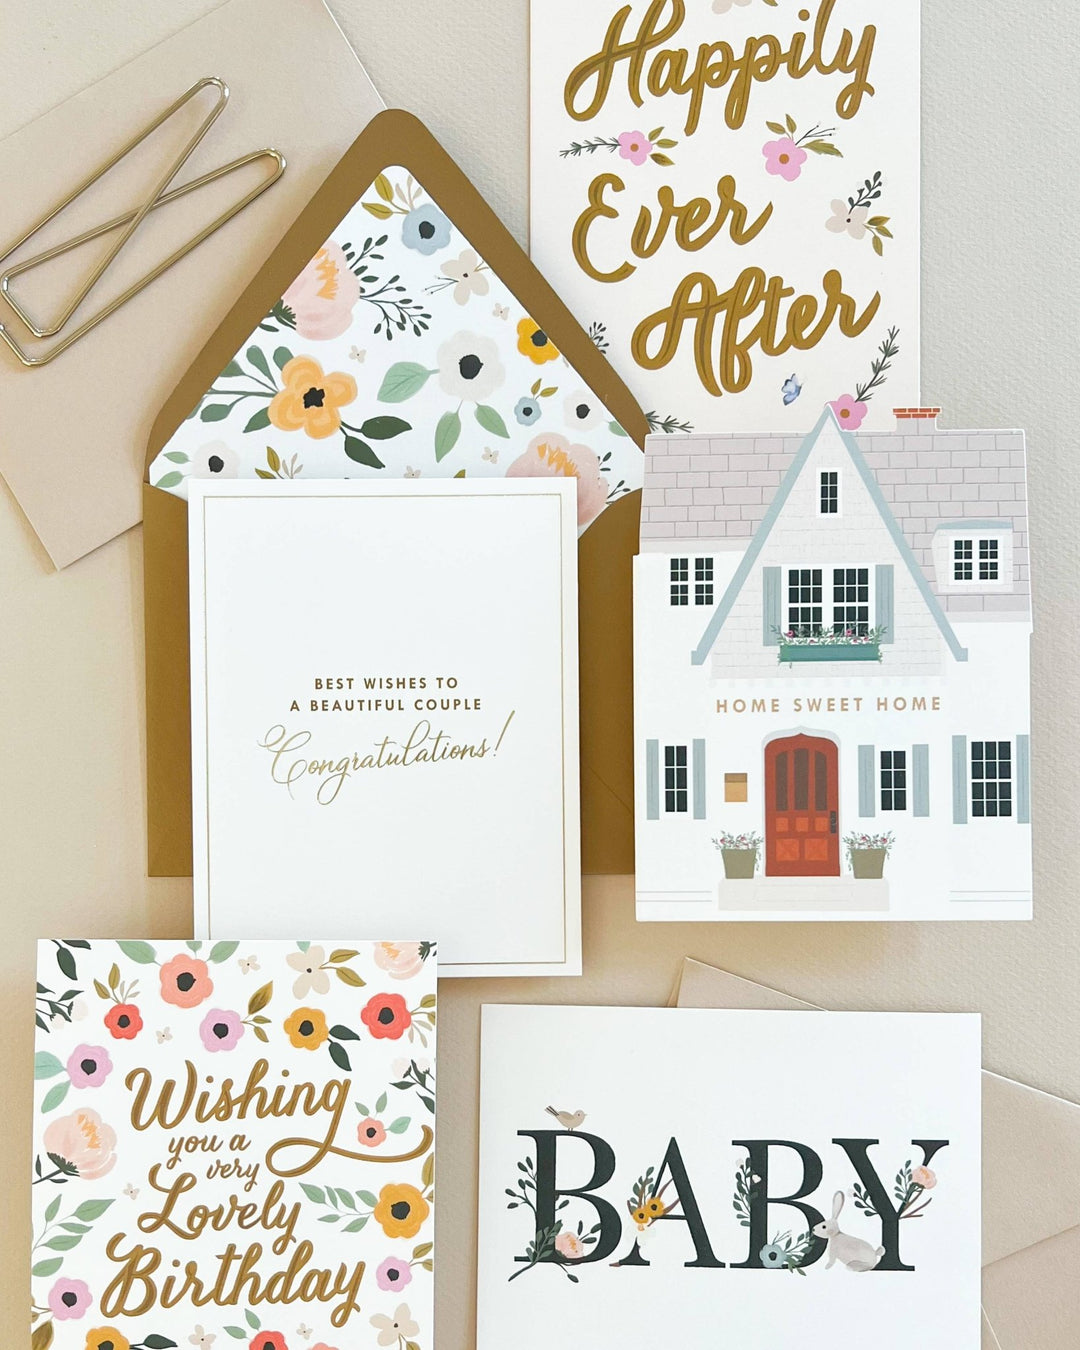 CardsHappily Ever After Greeting Card